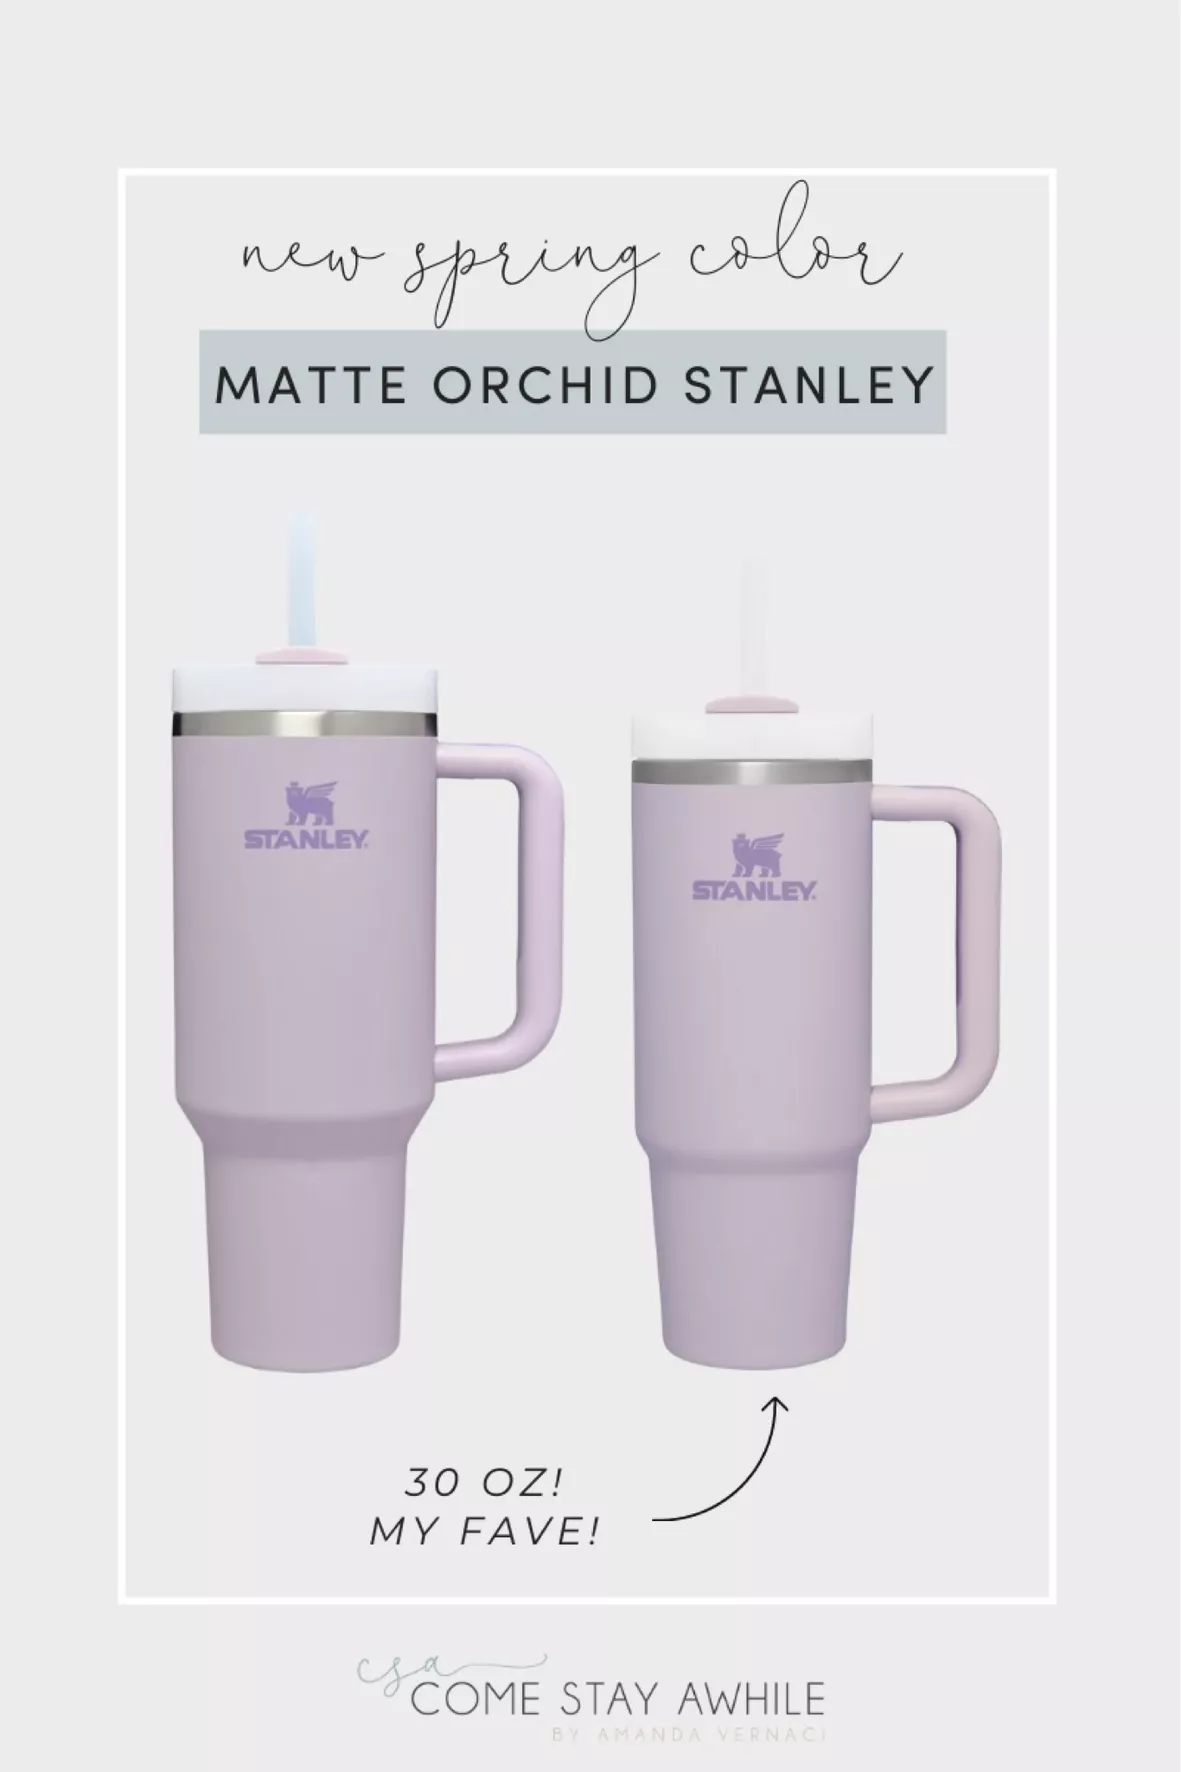 Stanley, Other, Orchid New 4 Oz Stanley Quencher